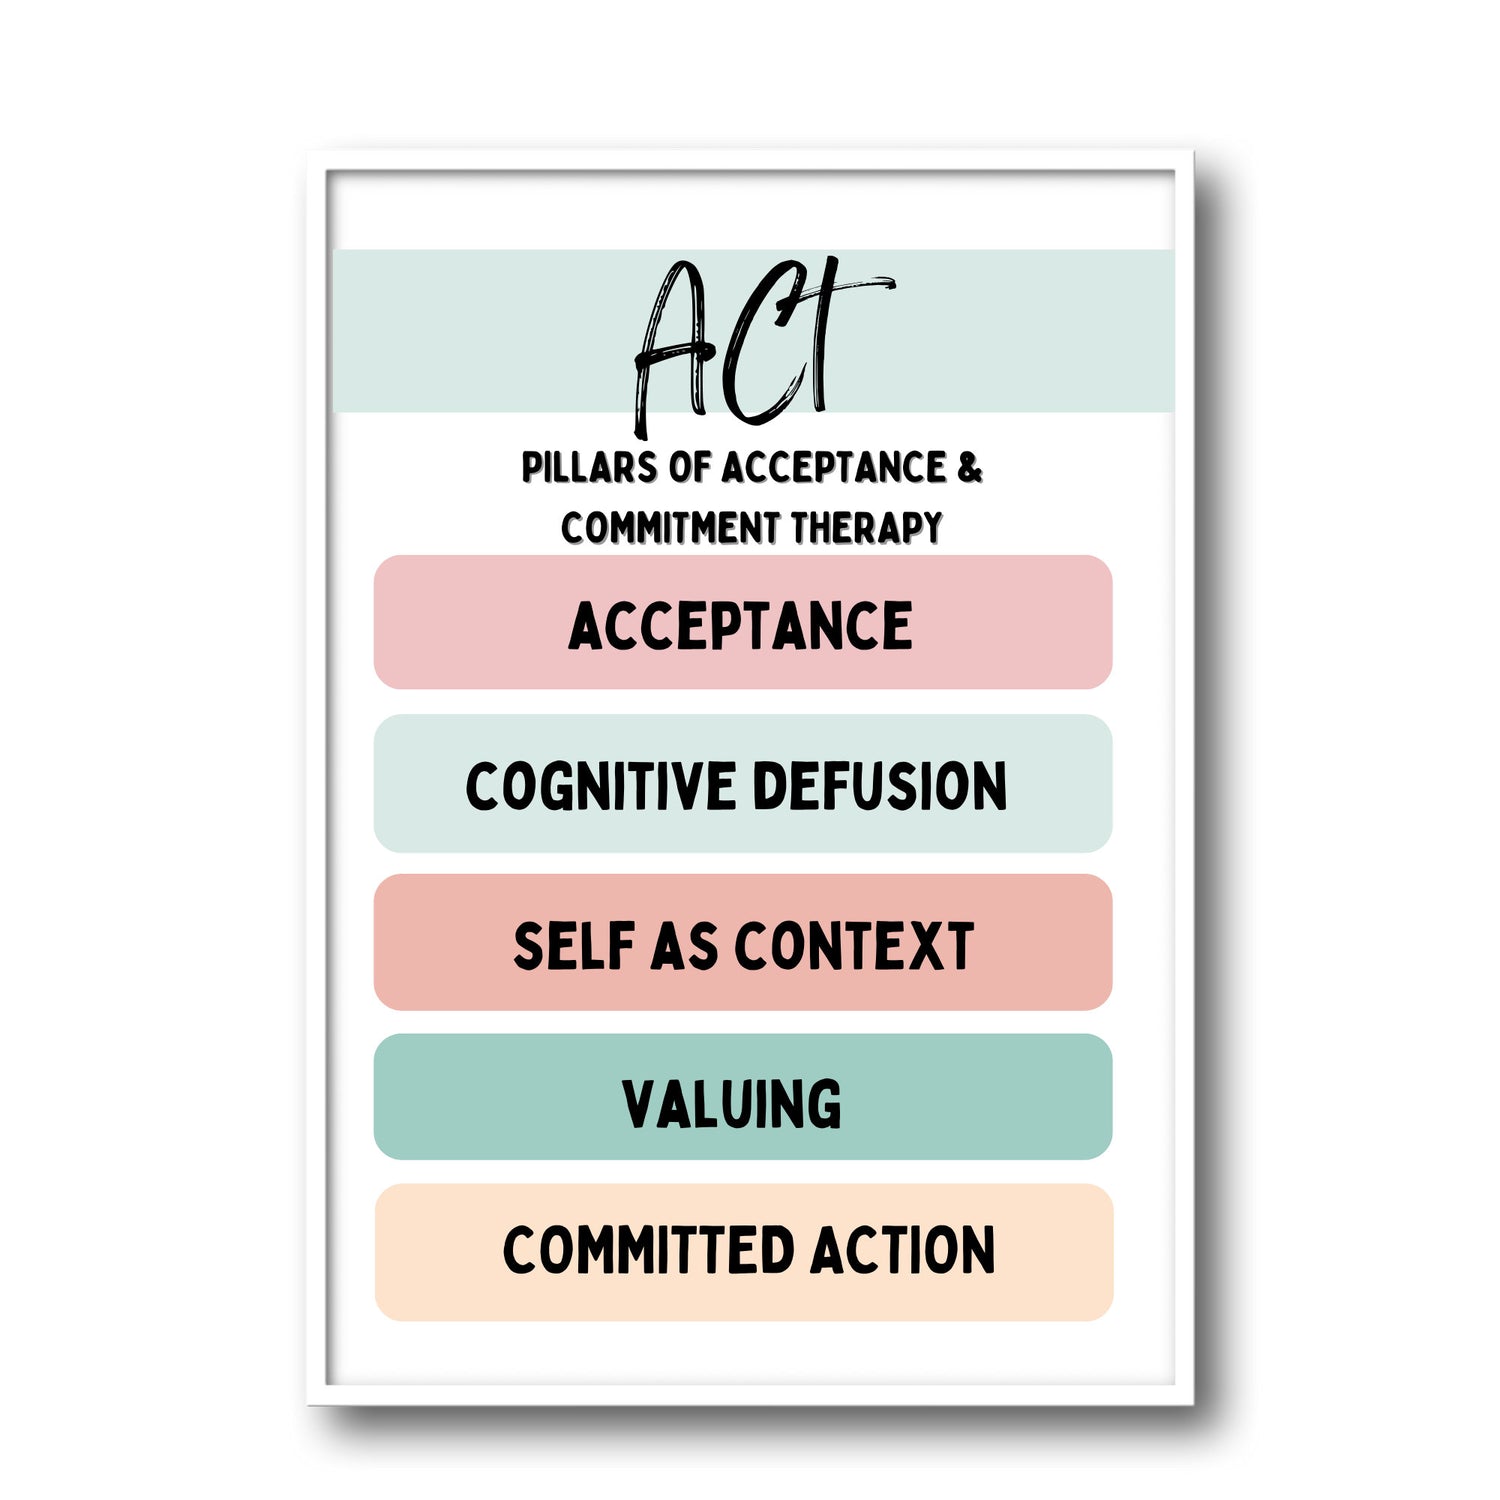 Therapy Office Decor: ACT Poster & More.